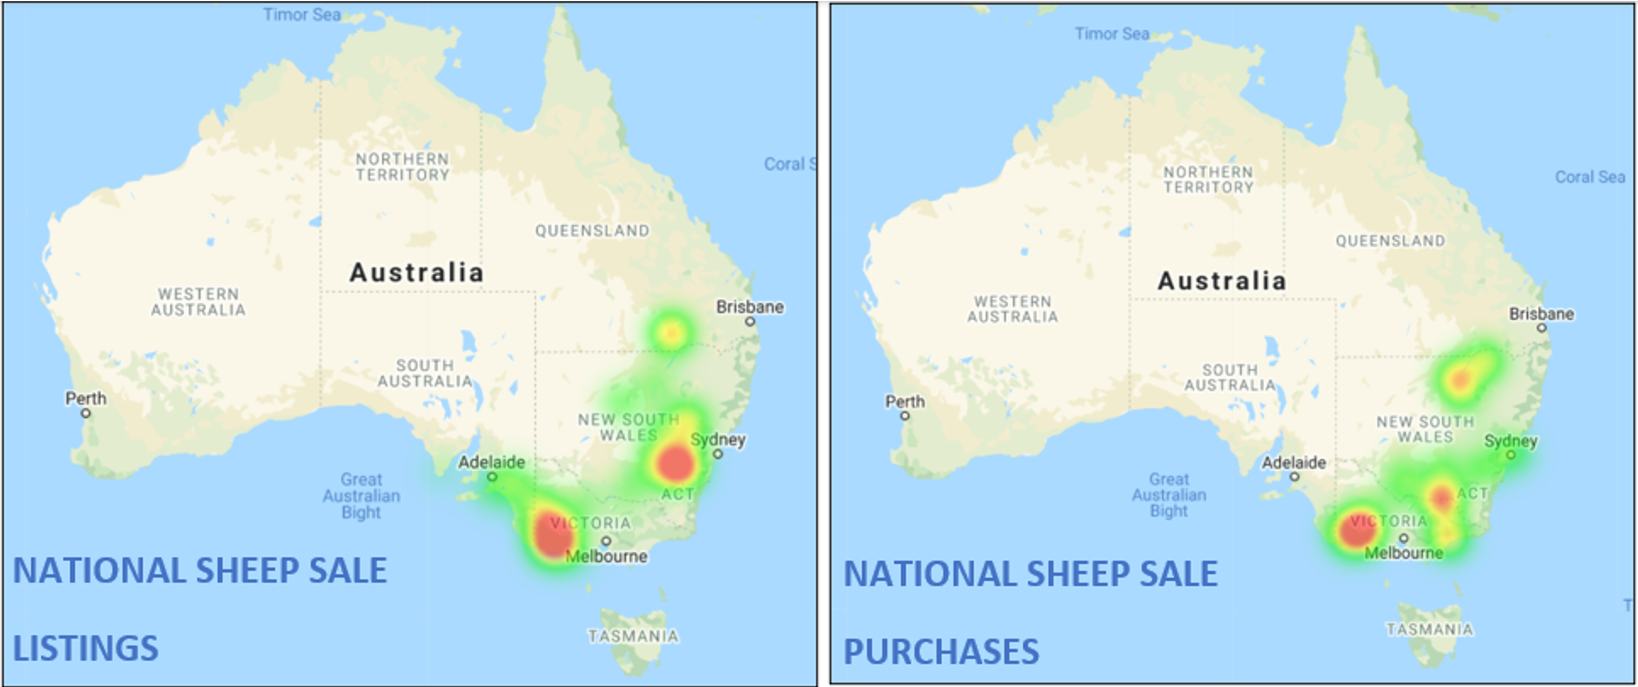 Sheep Listings & Purchases 7.1.22